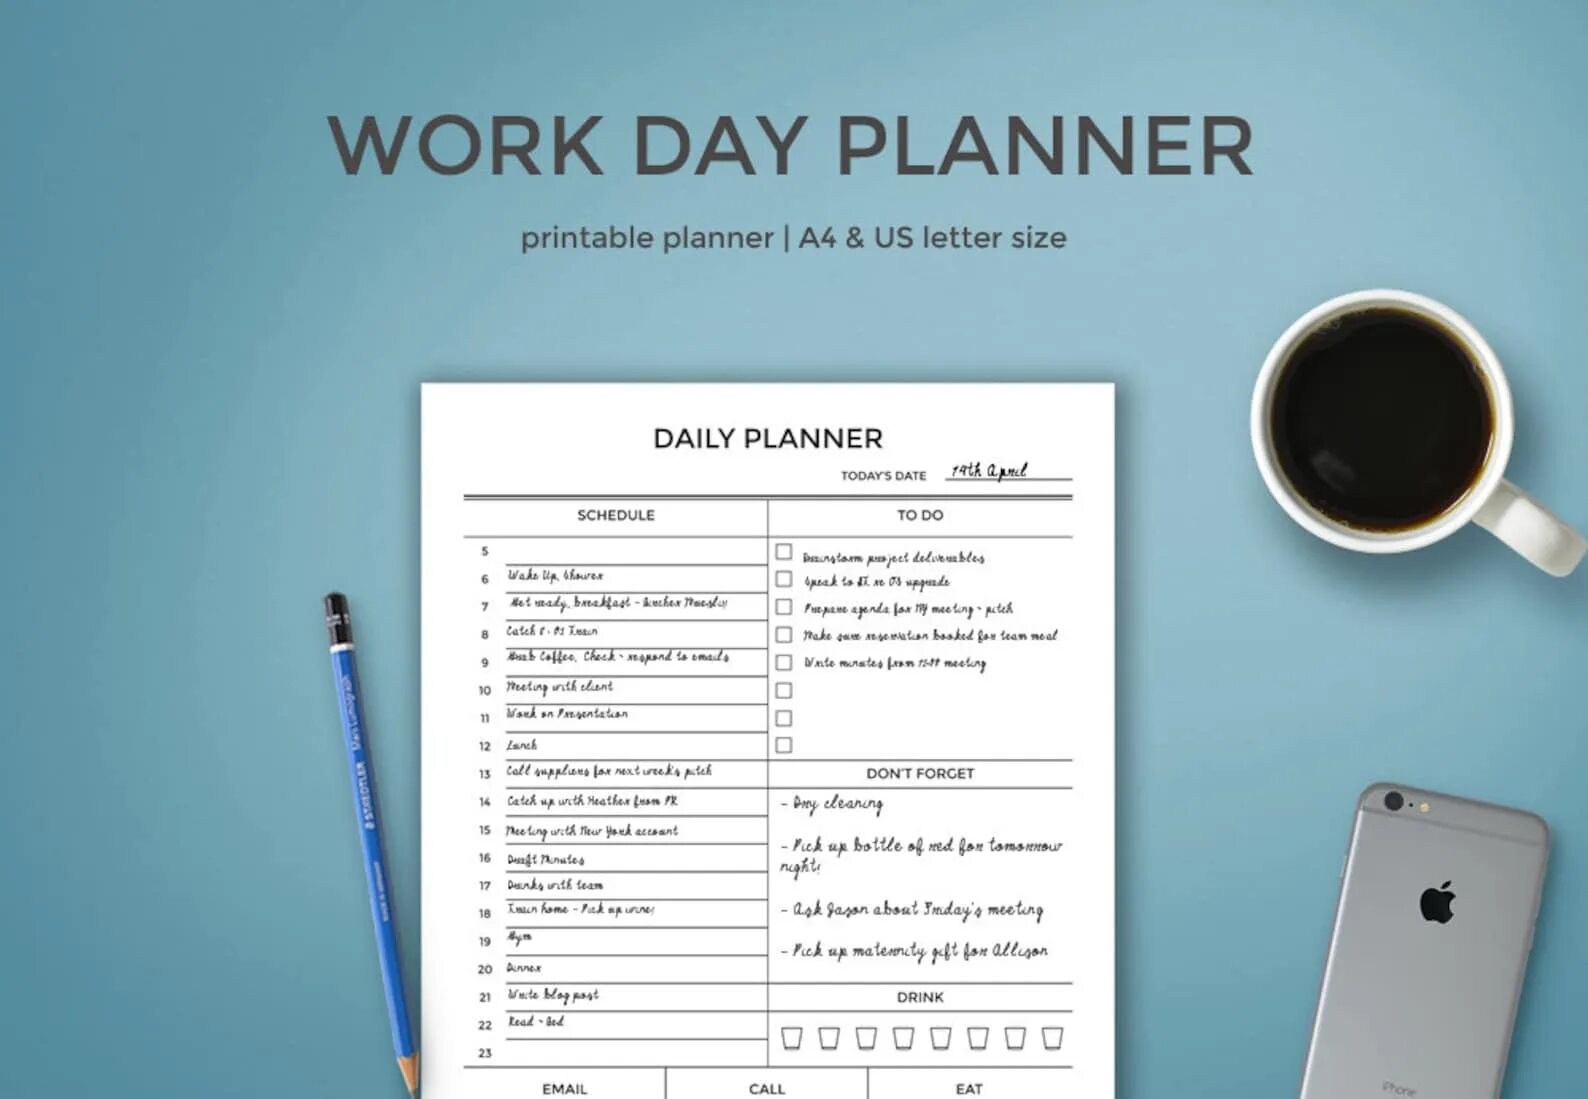 Daily Planner. Plan for the Day. Working Day Plan. Planner for Day. Plan your day